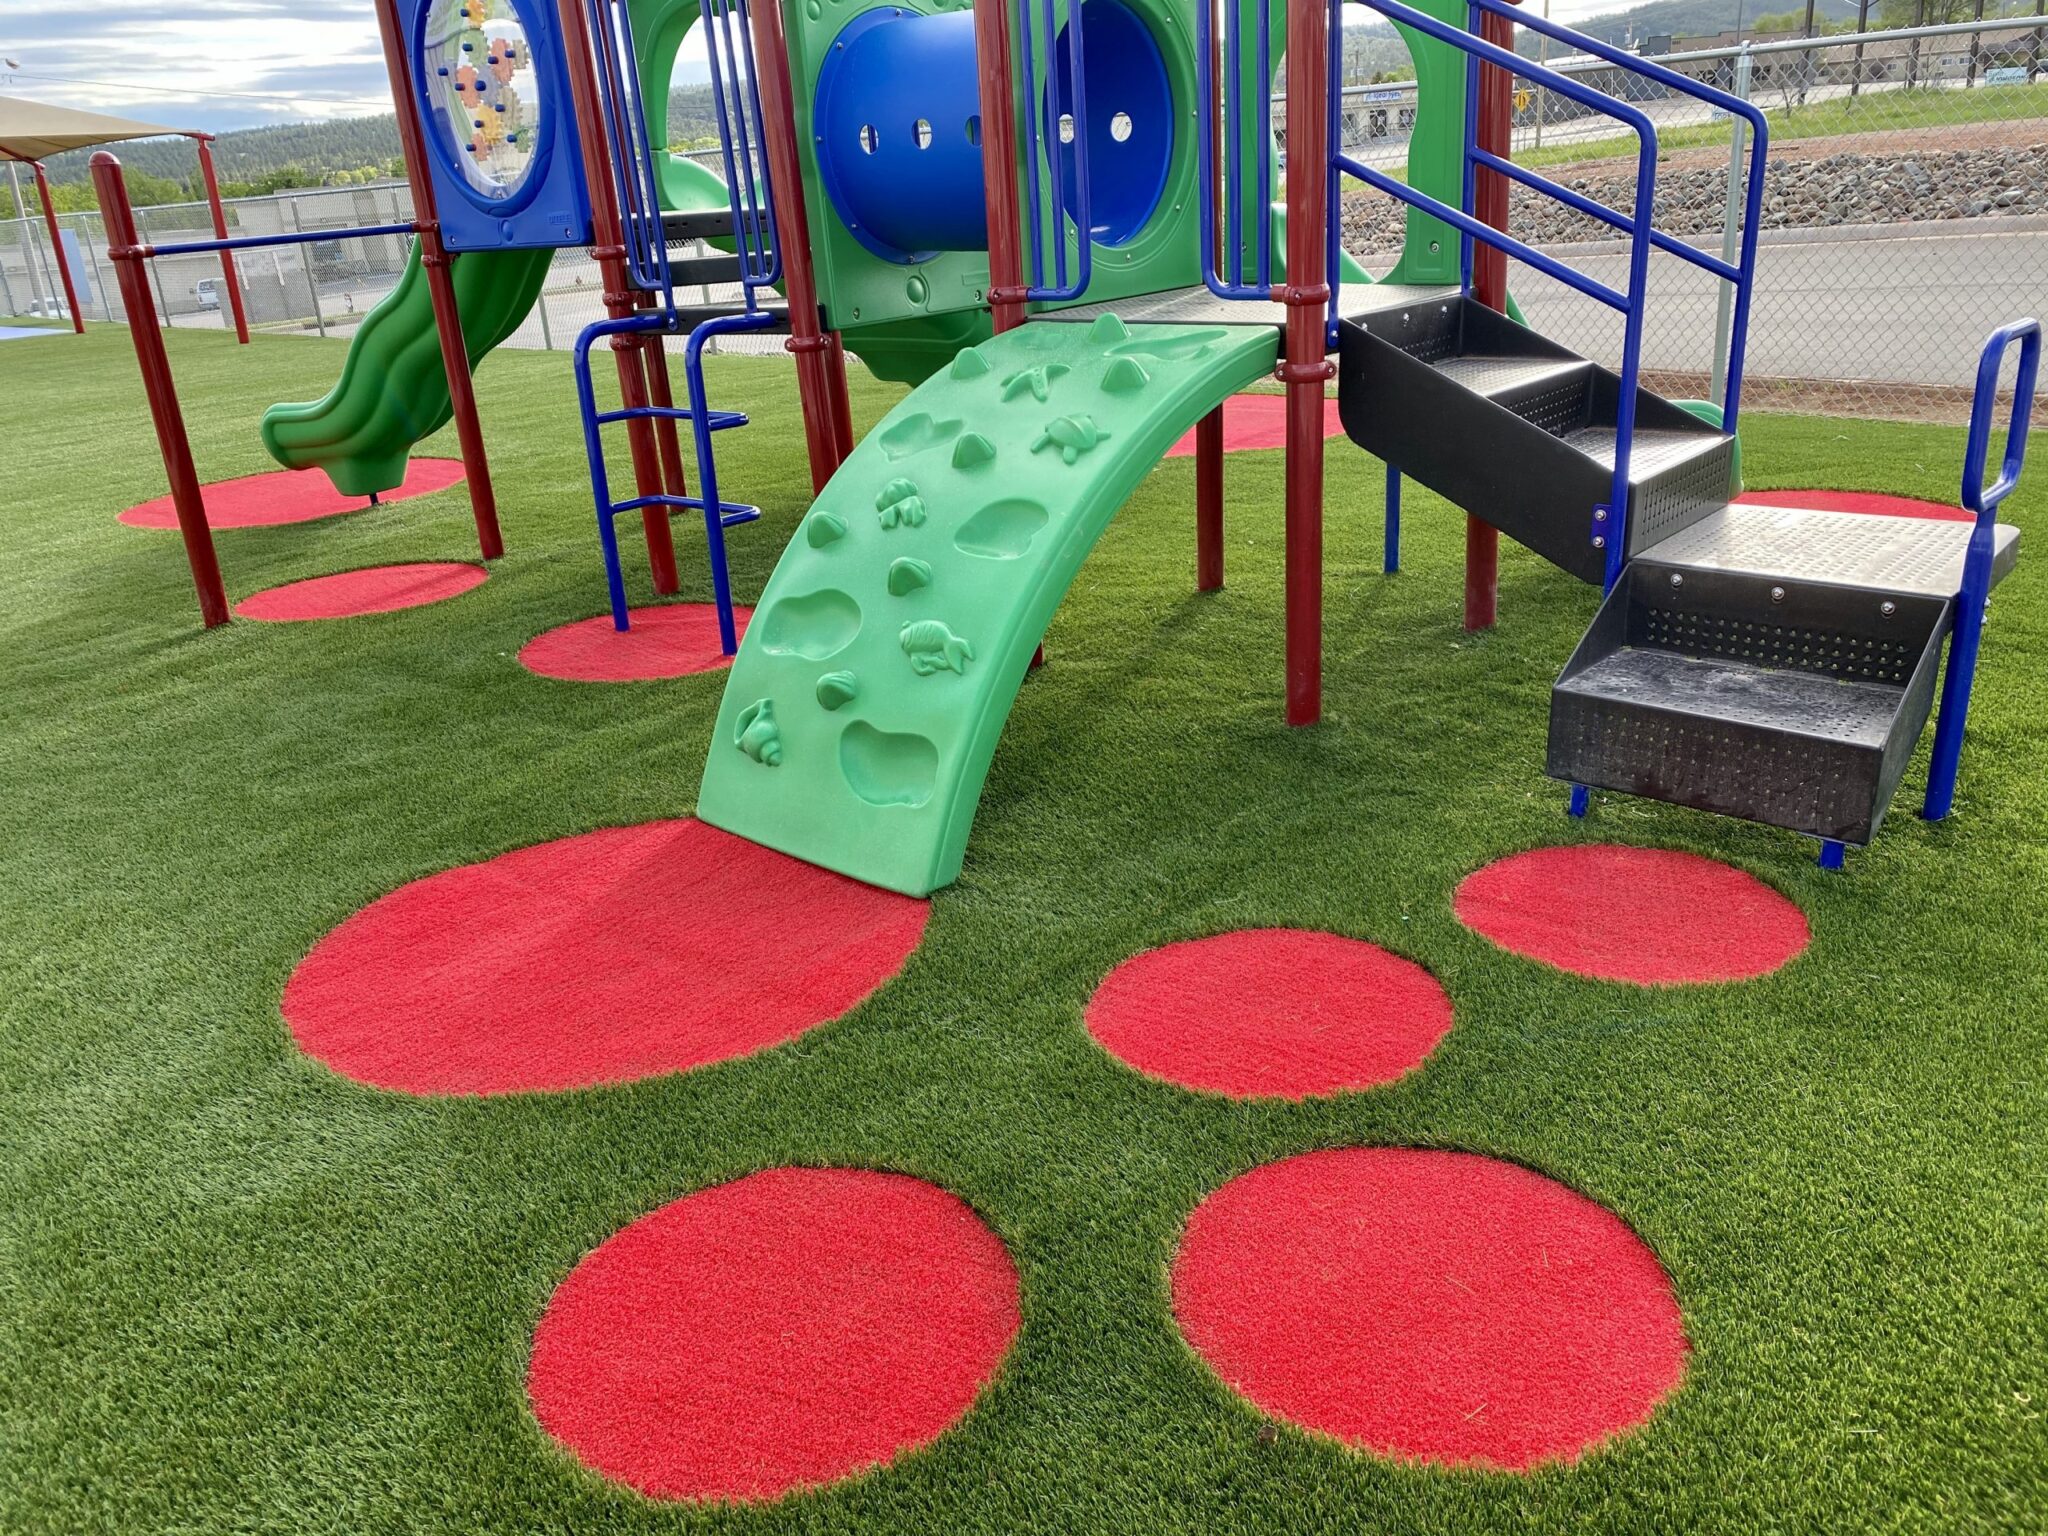 5 Reasons To Use Artificial Grass For Kid's Playground Area In Poway